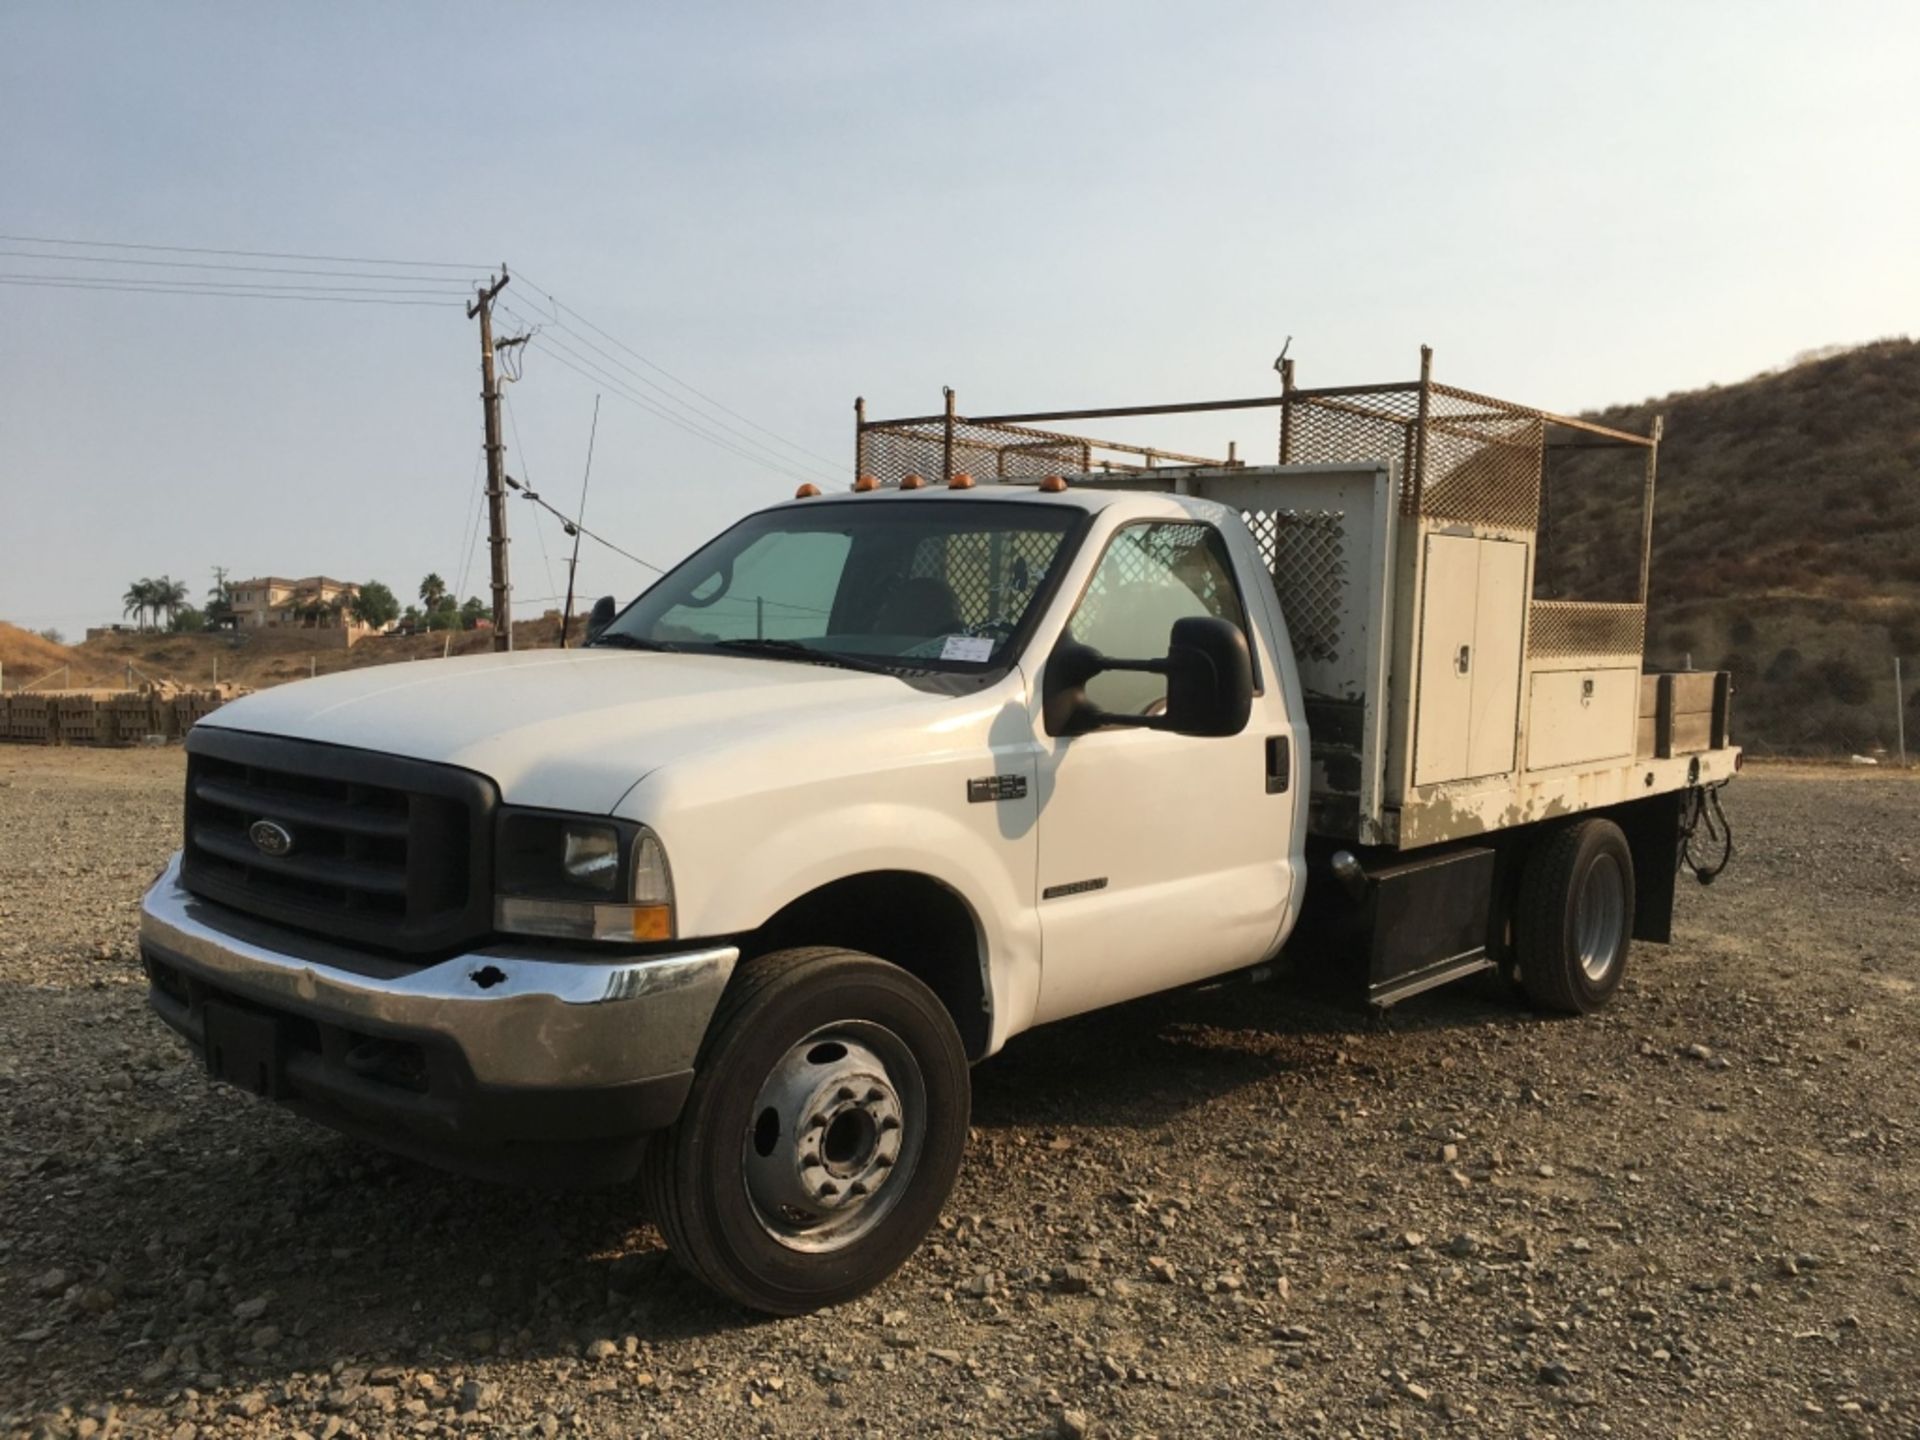 Ford F450 Service Truck,